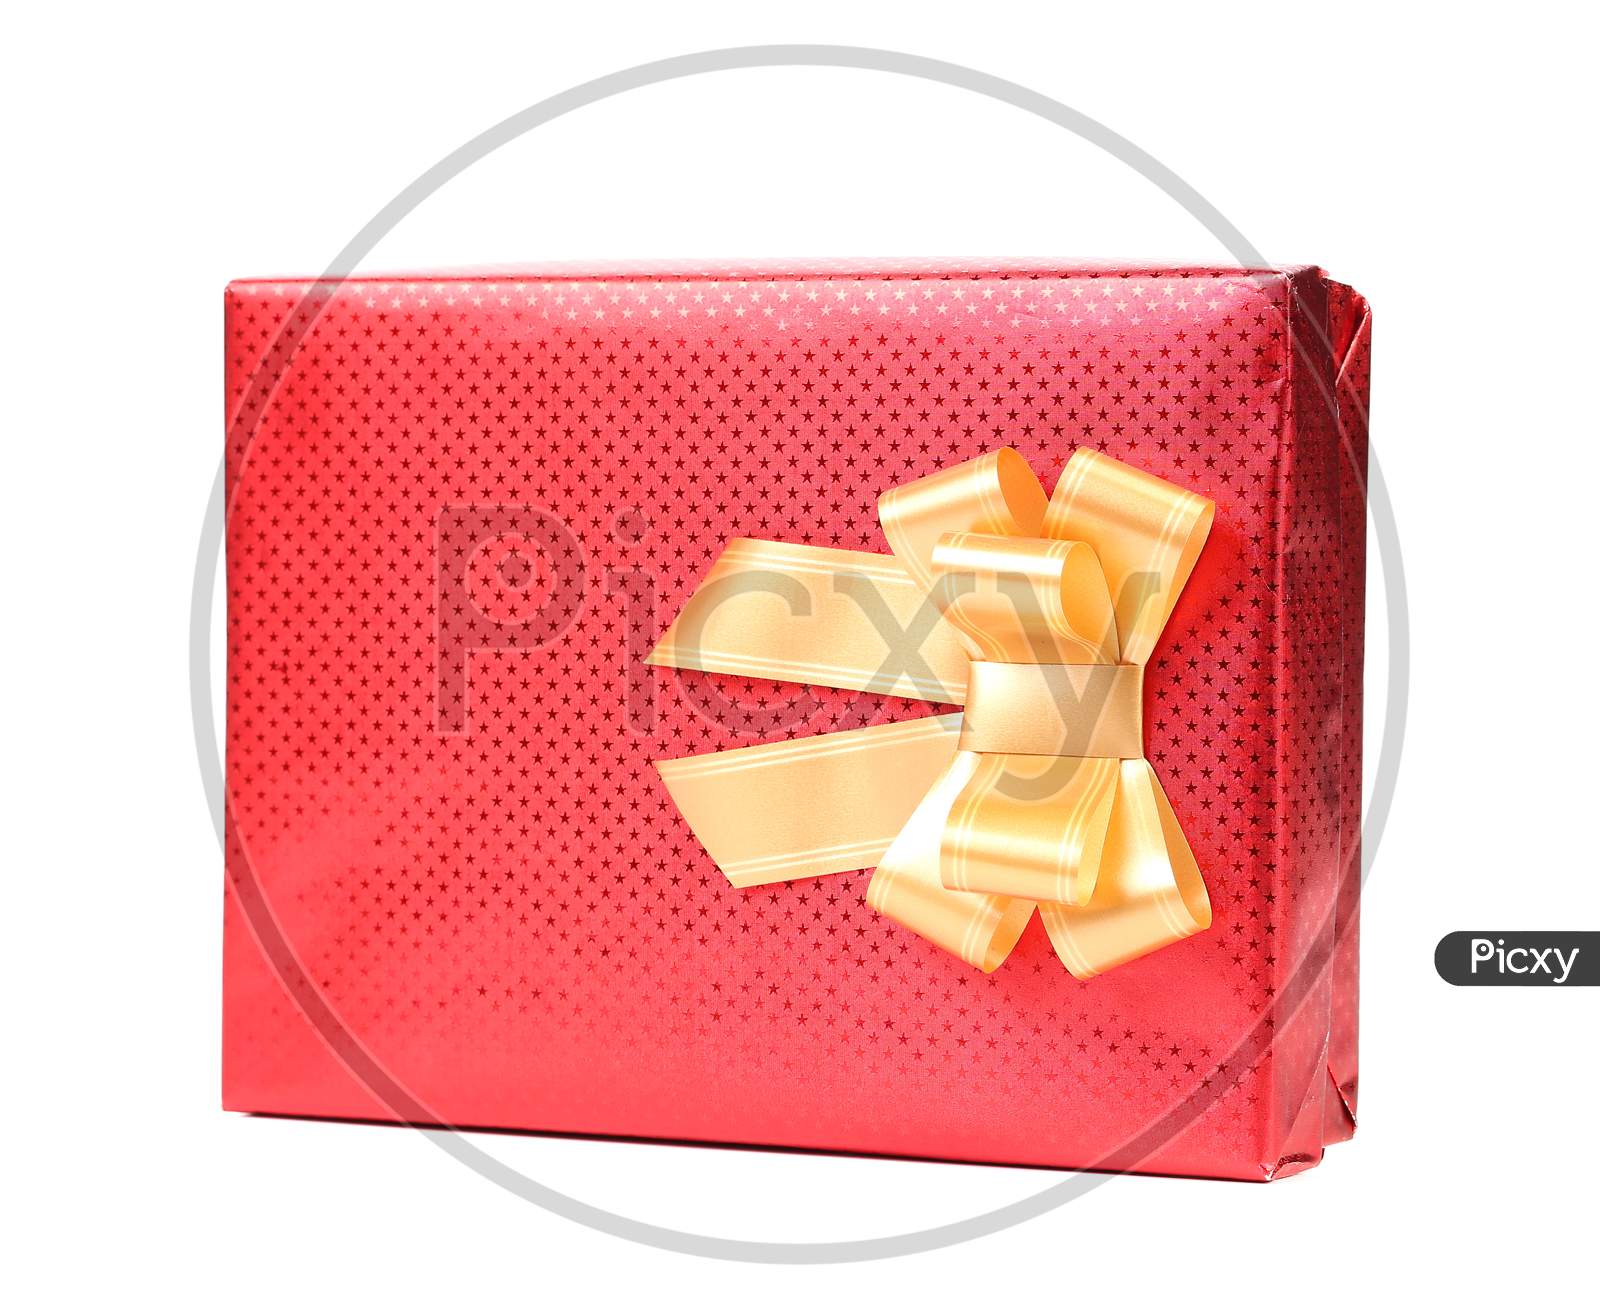 Red Gift Box With Golden Bow. Isolated On A White Background.